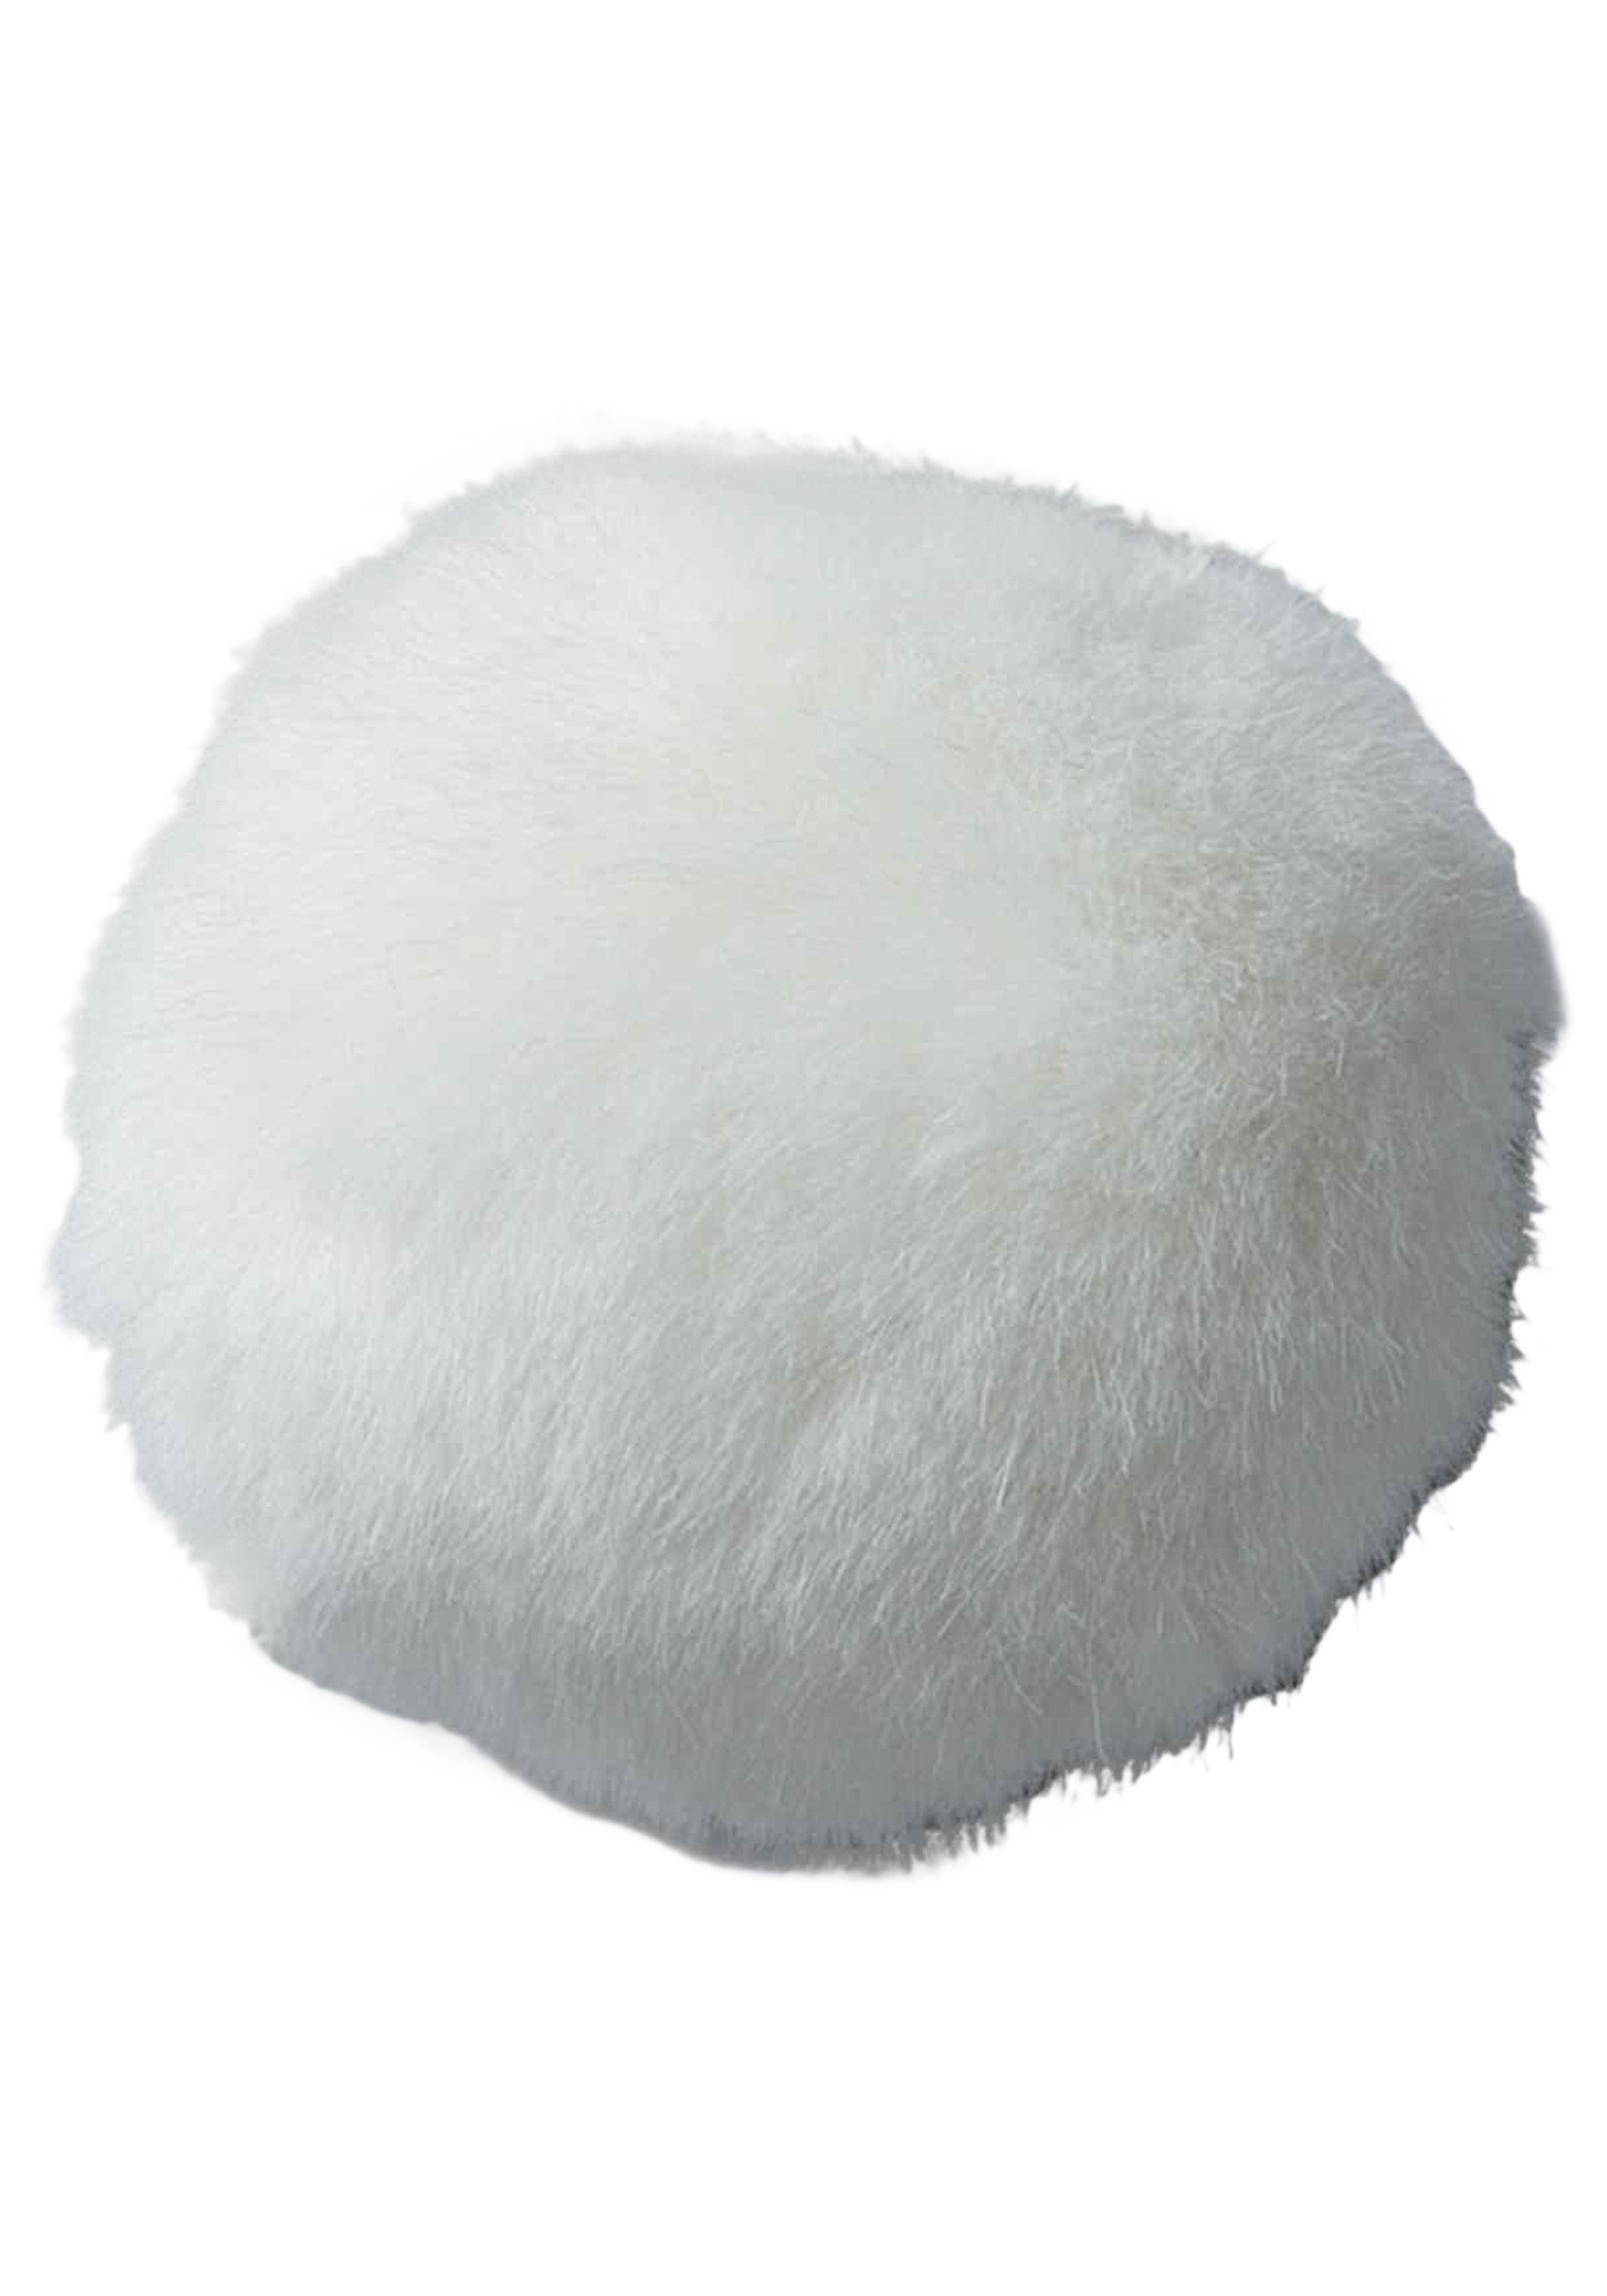 White Bunny Tail Accessory